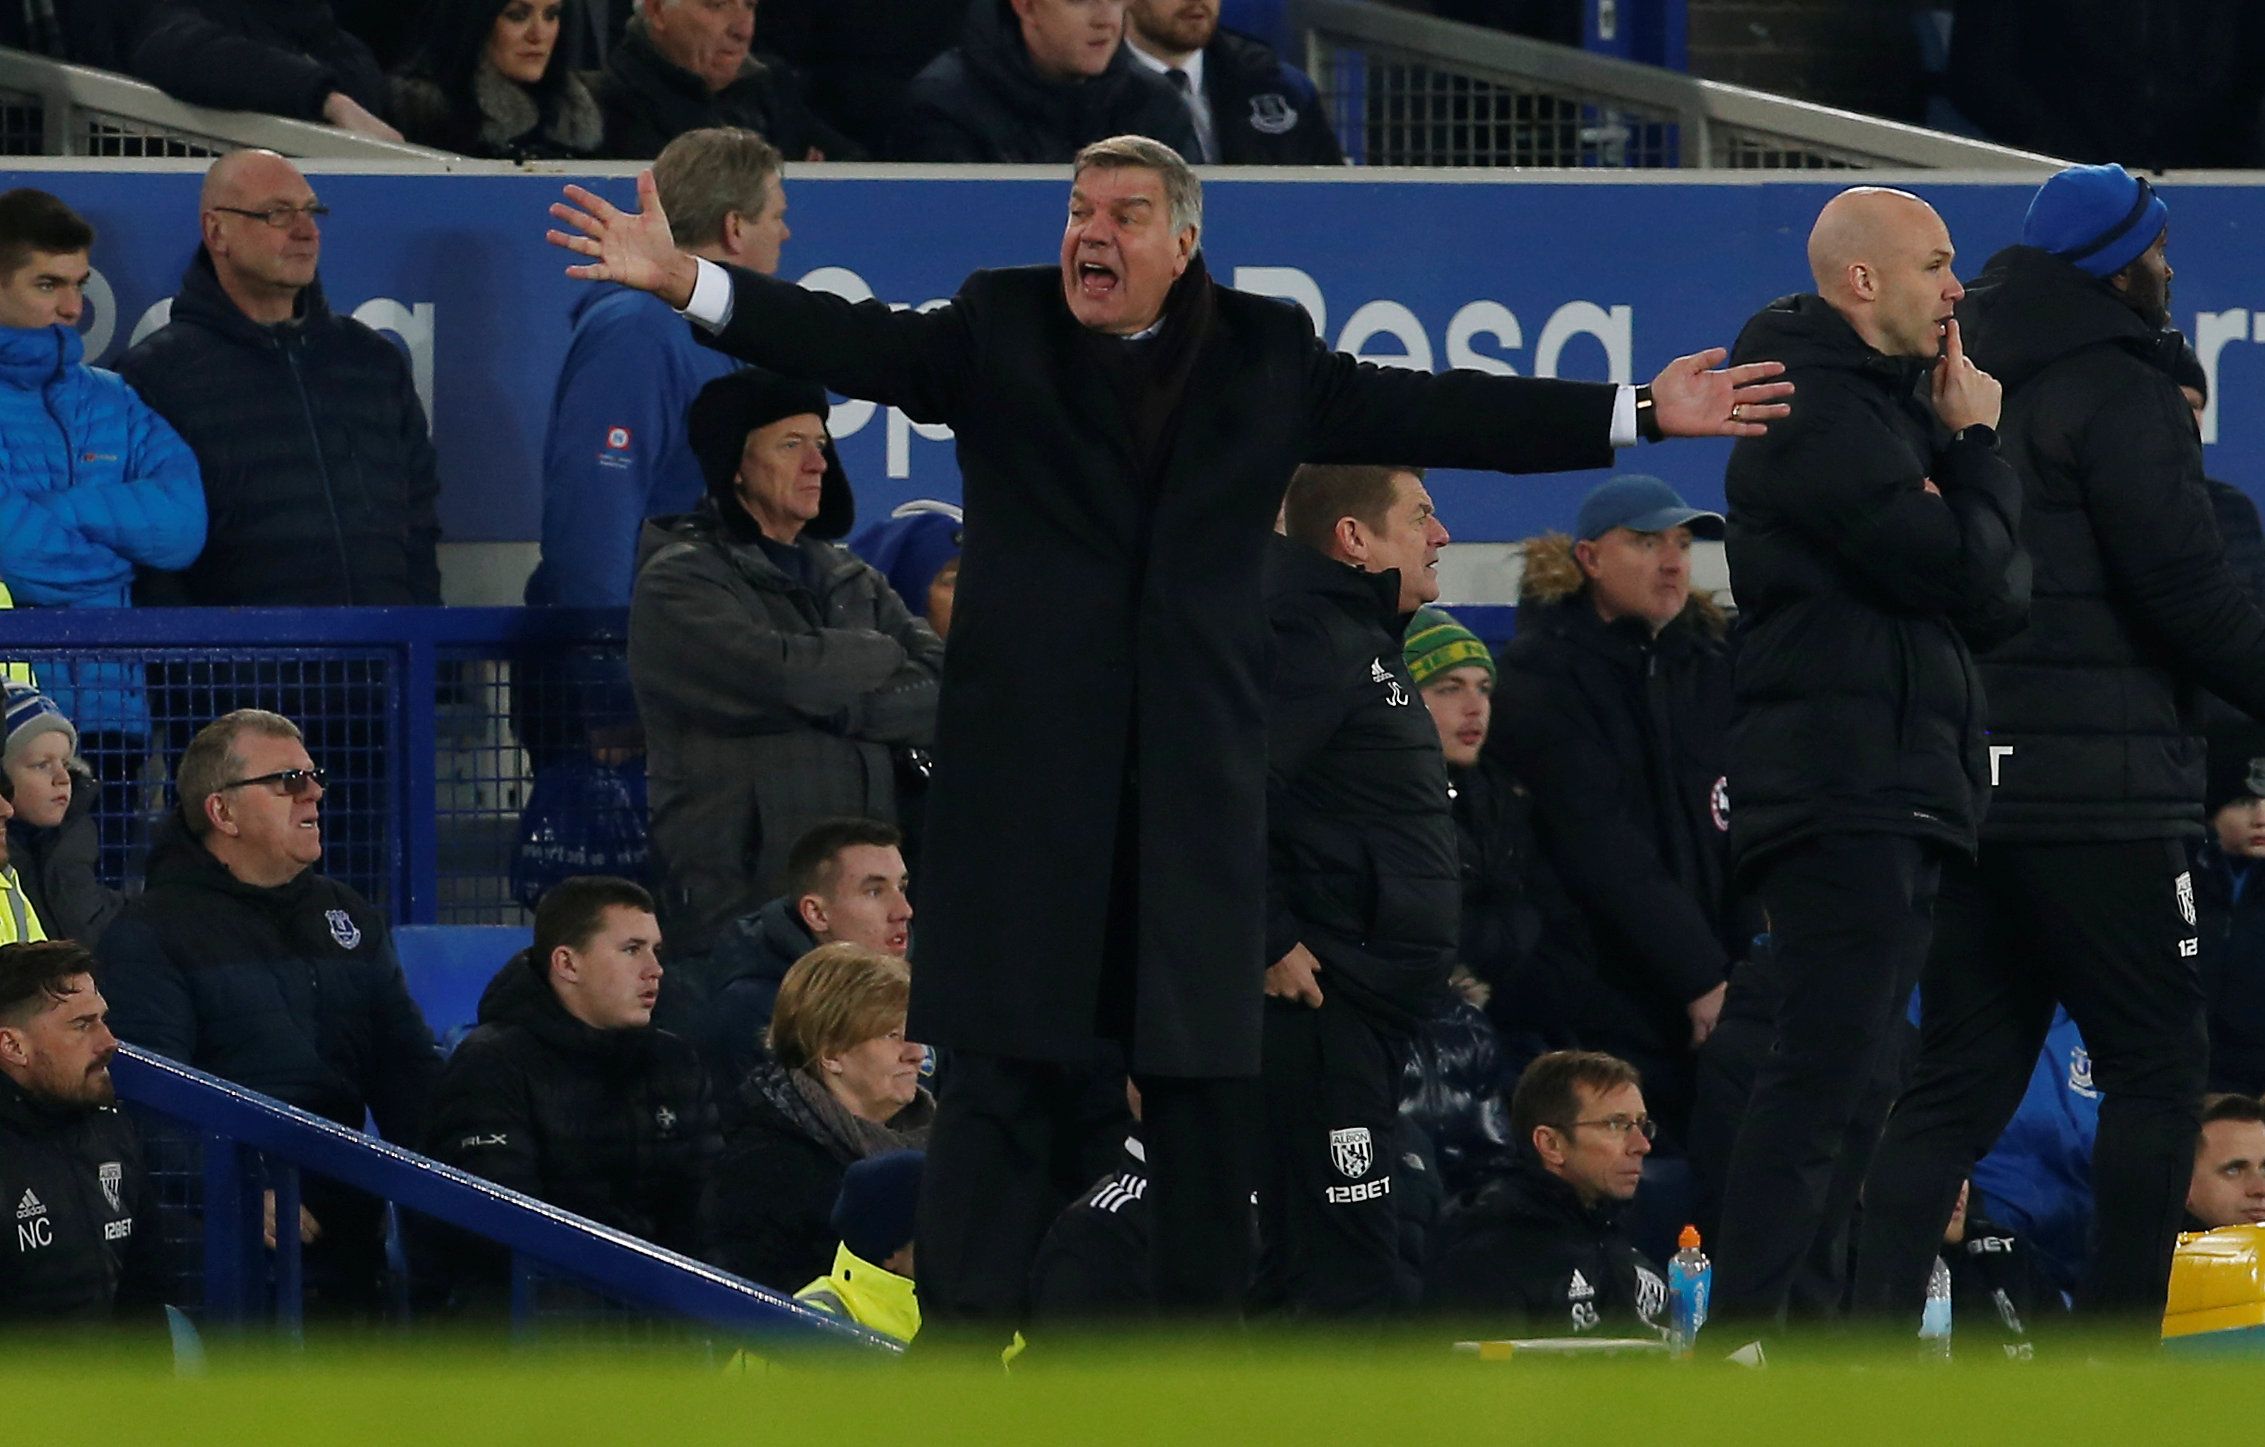 Soccer Football - Premier League - Everton vs West Bromwich Albion - Goodison Park, Liverpool, Britain - January 20, 2018   Everton manager Sam Allardyce reacts   Action Images via Reuters/Craig Brough    EDITORIAL USE ONLY. No use with unauthorized audio, video, data, fixture lists, club/league logos or 